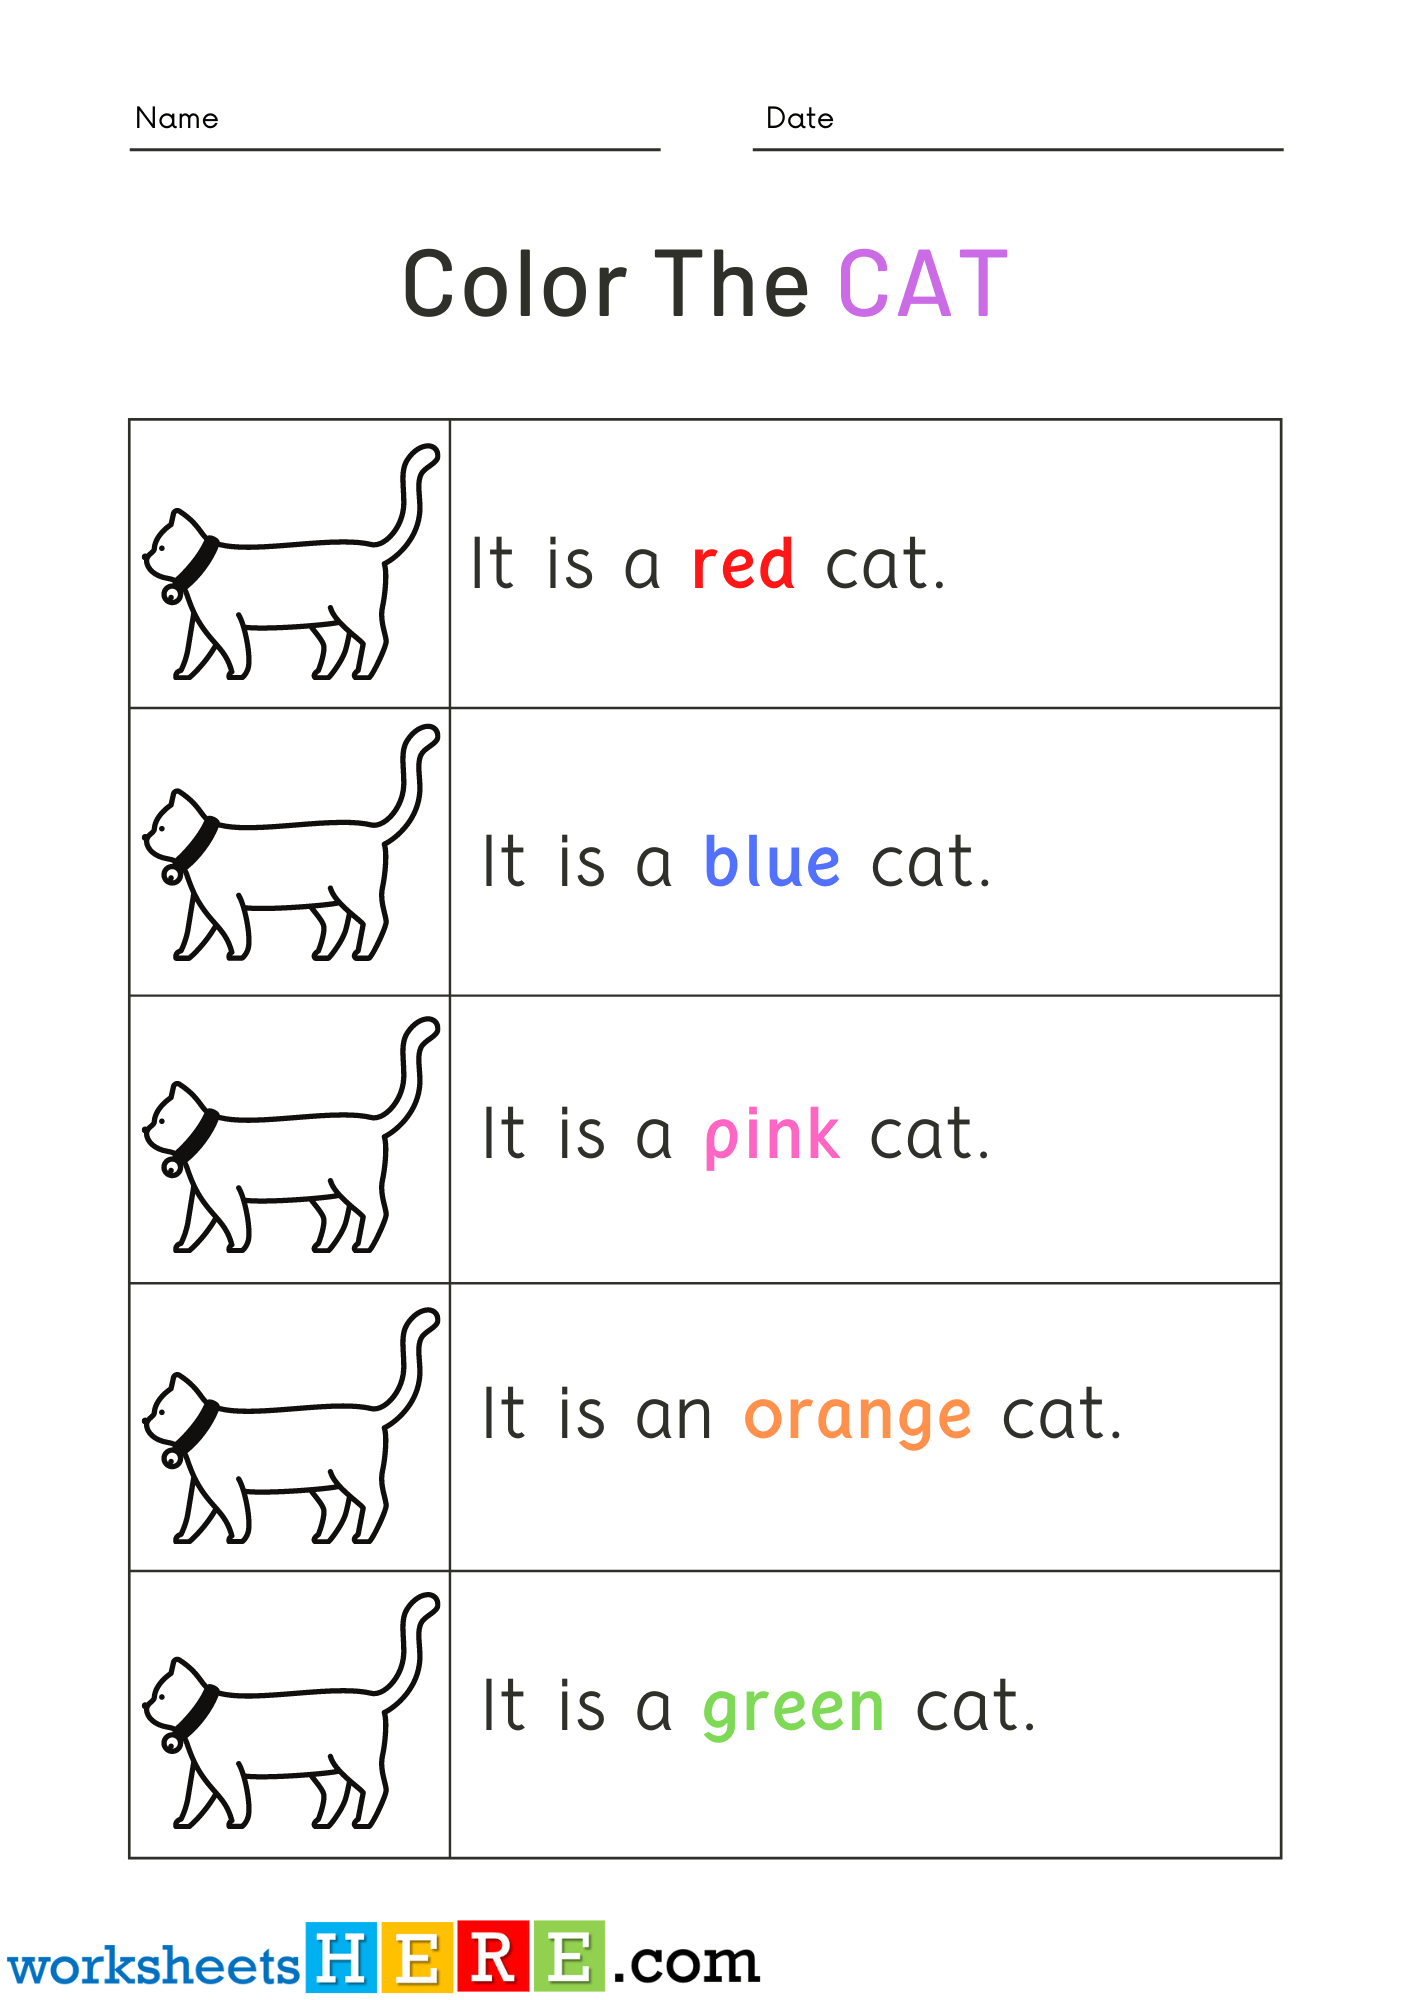 Read Words and Color Cat Pictures Activity PDF Worksheets For Kindergarten